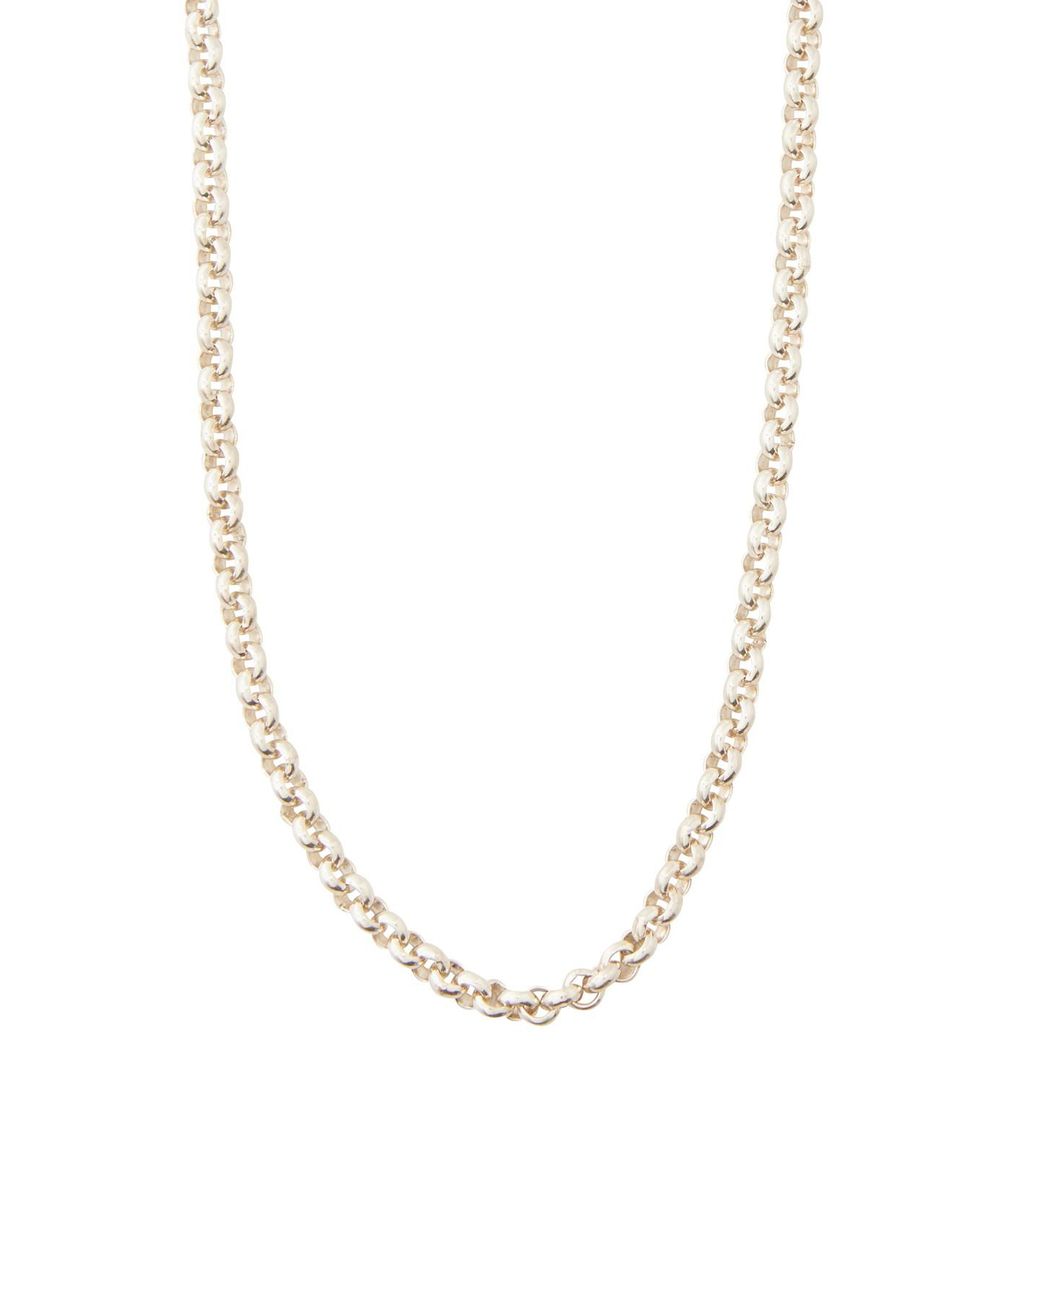 Charlotte Chesnais Halo Necklace in Metallic | Lyst